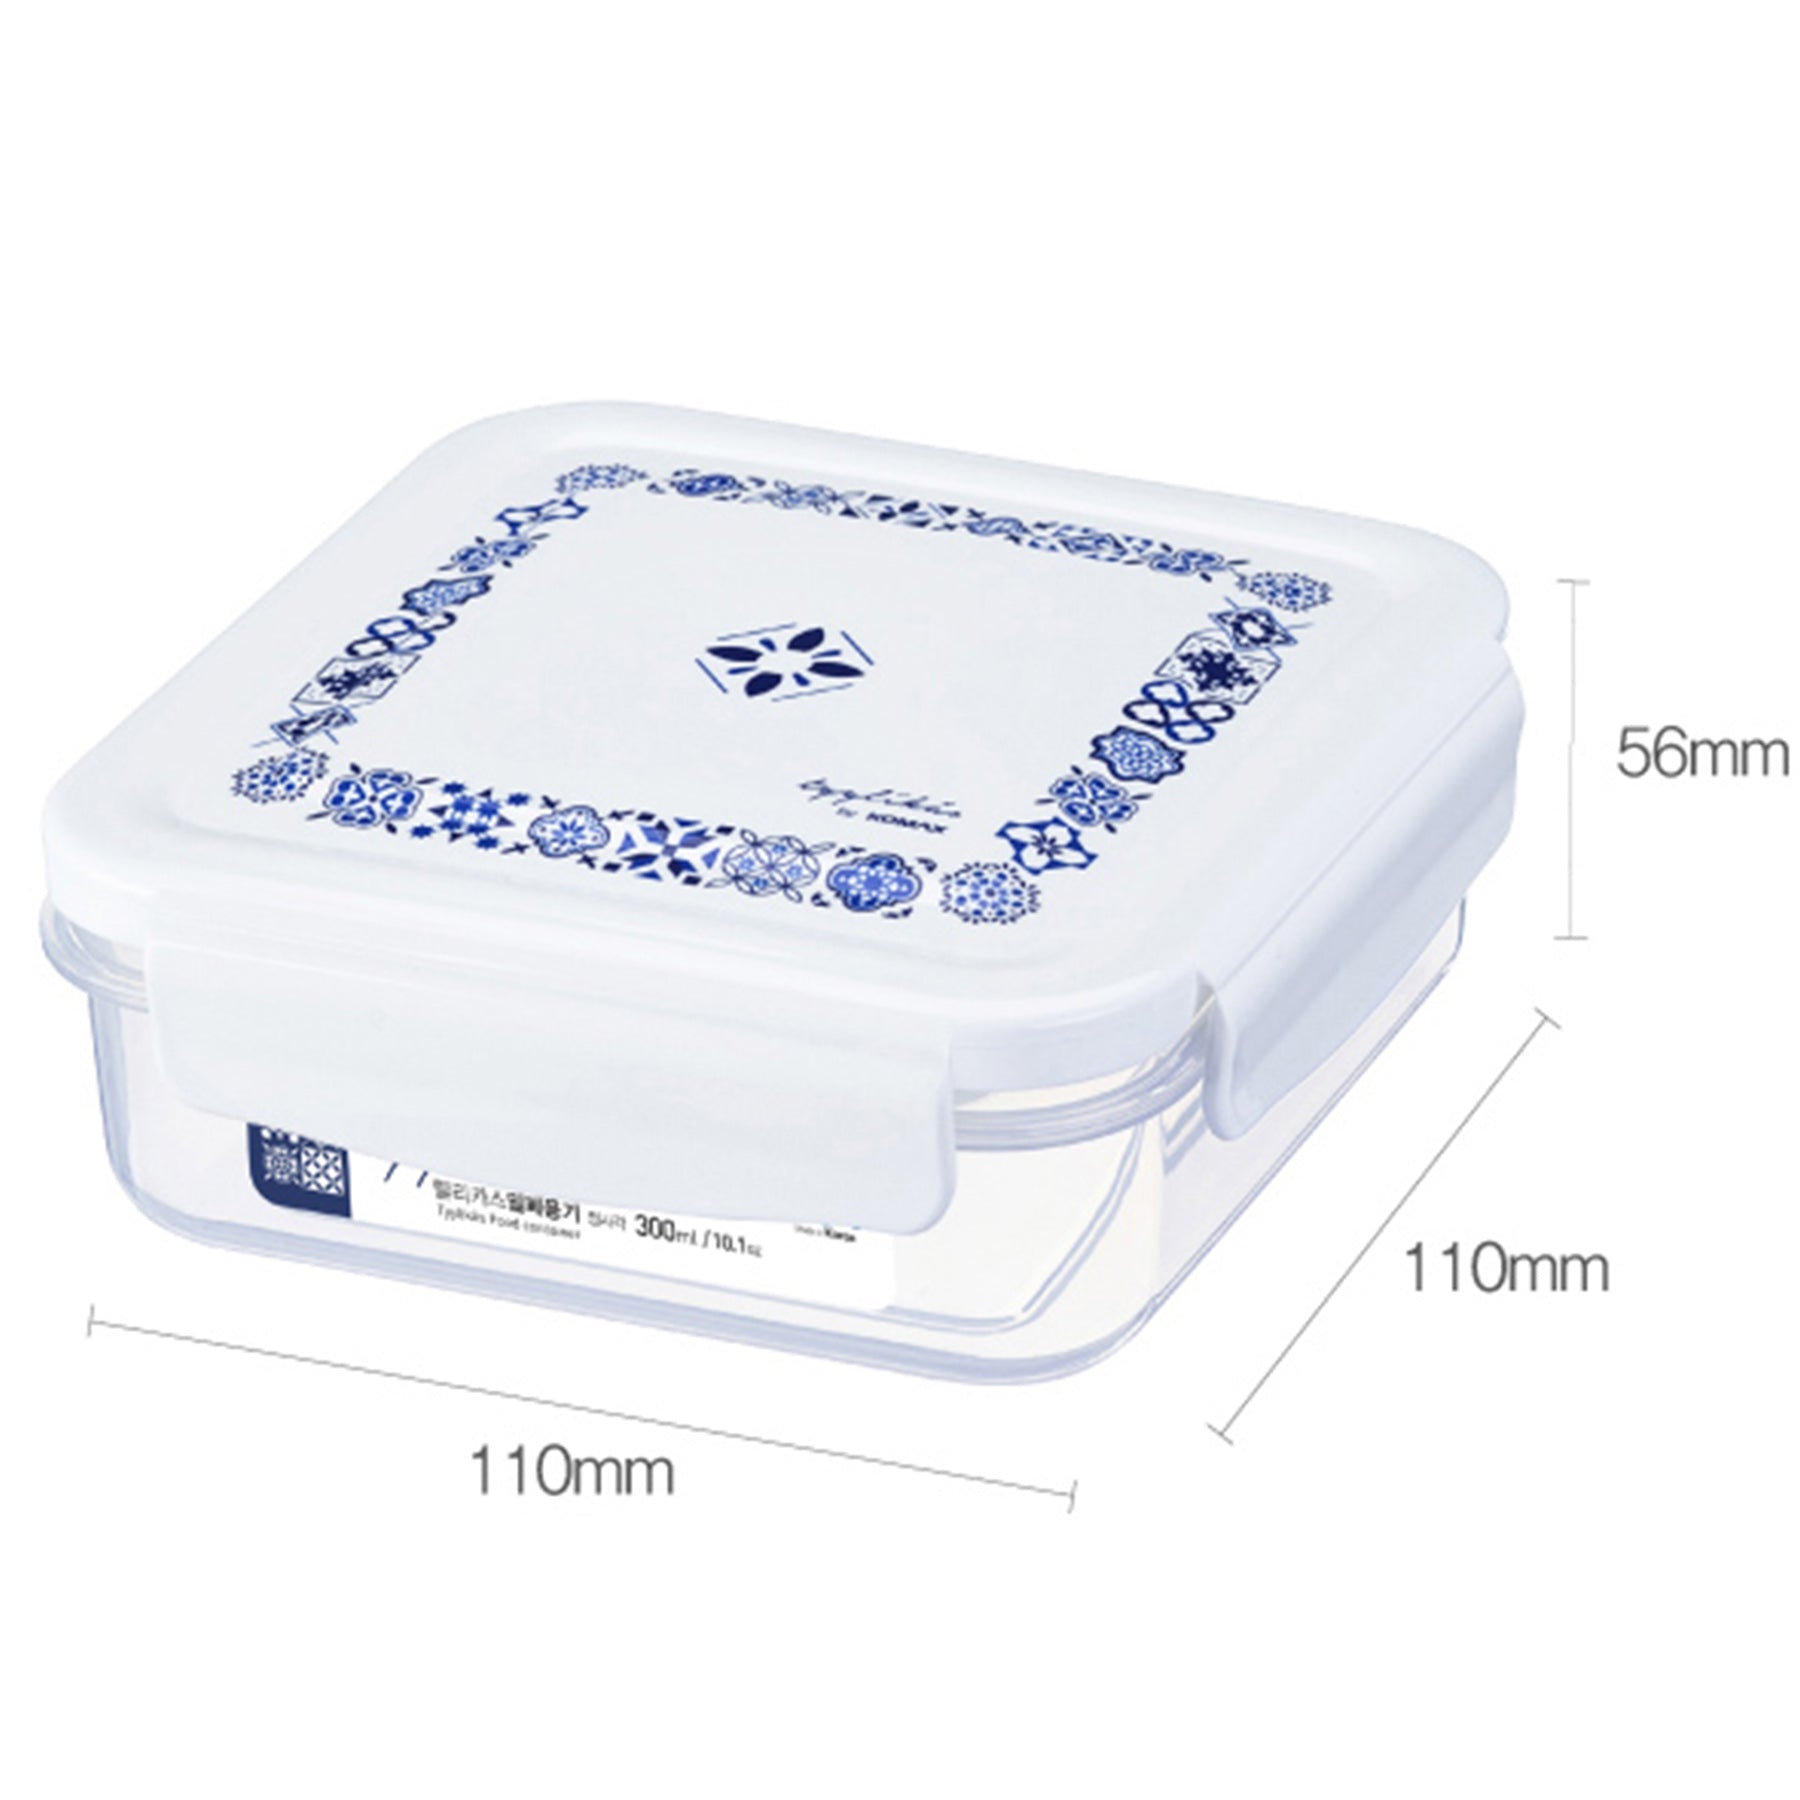 Food Container - White & Blue